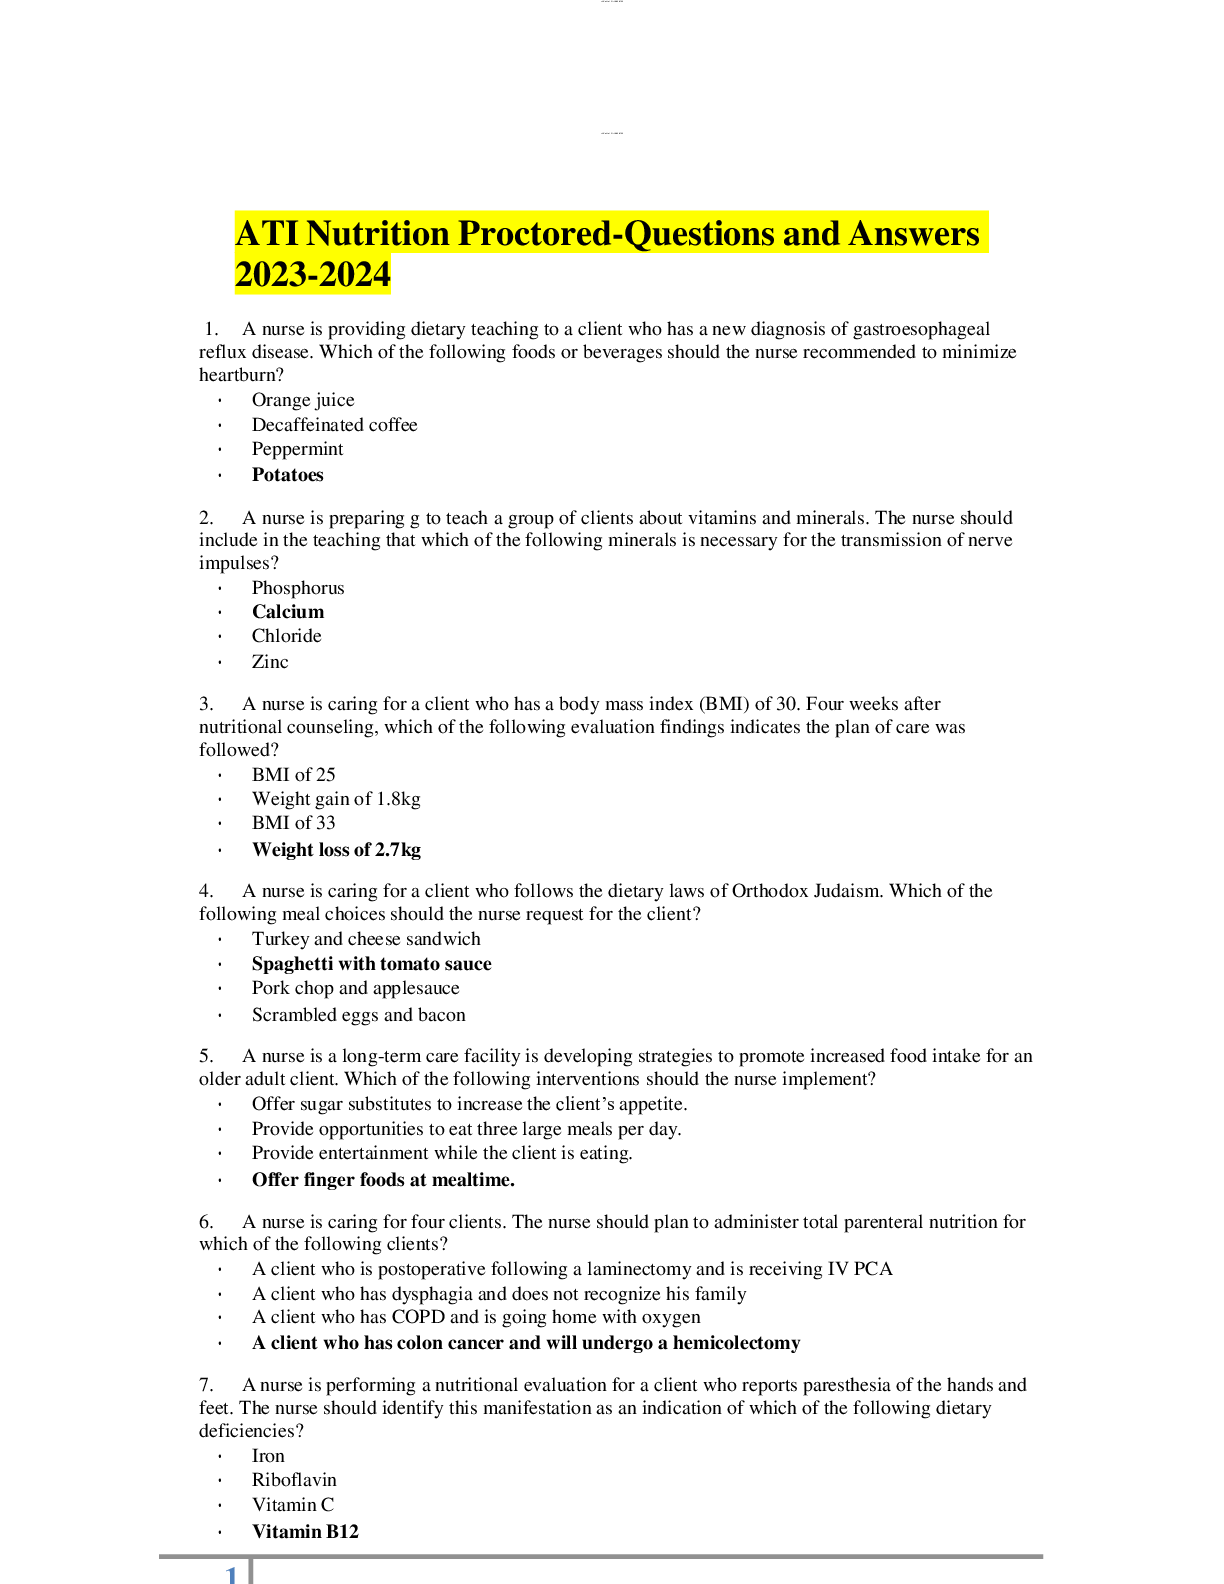 ATI Nutrition ProctoredQuestions and Answers 20232024 Browsegrades